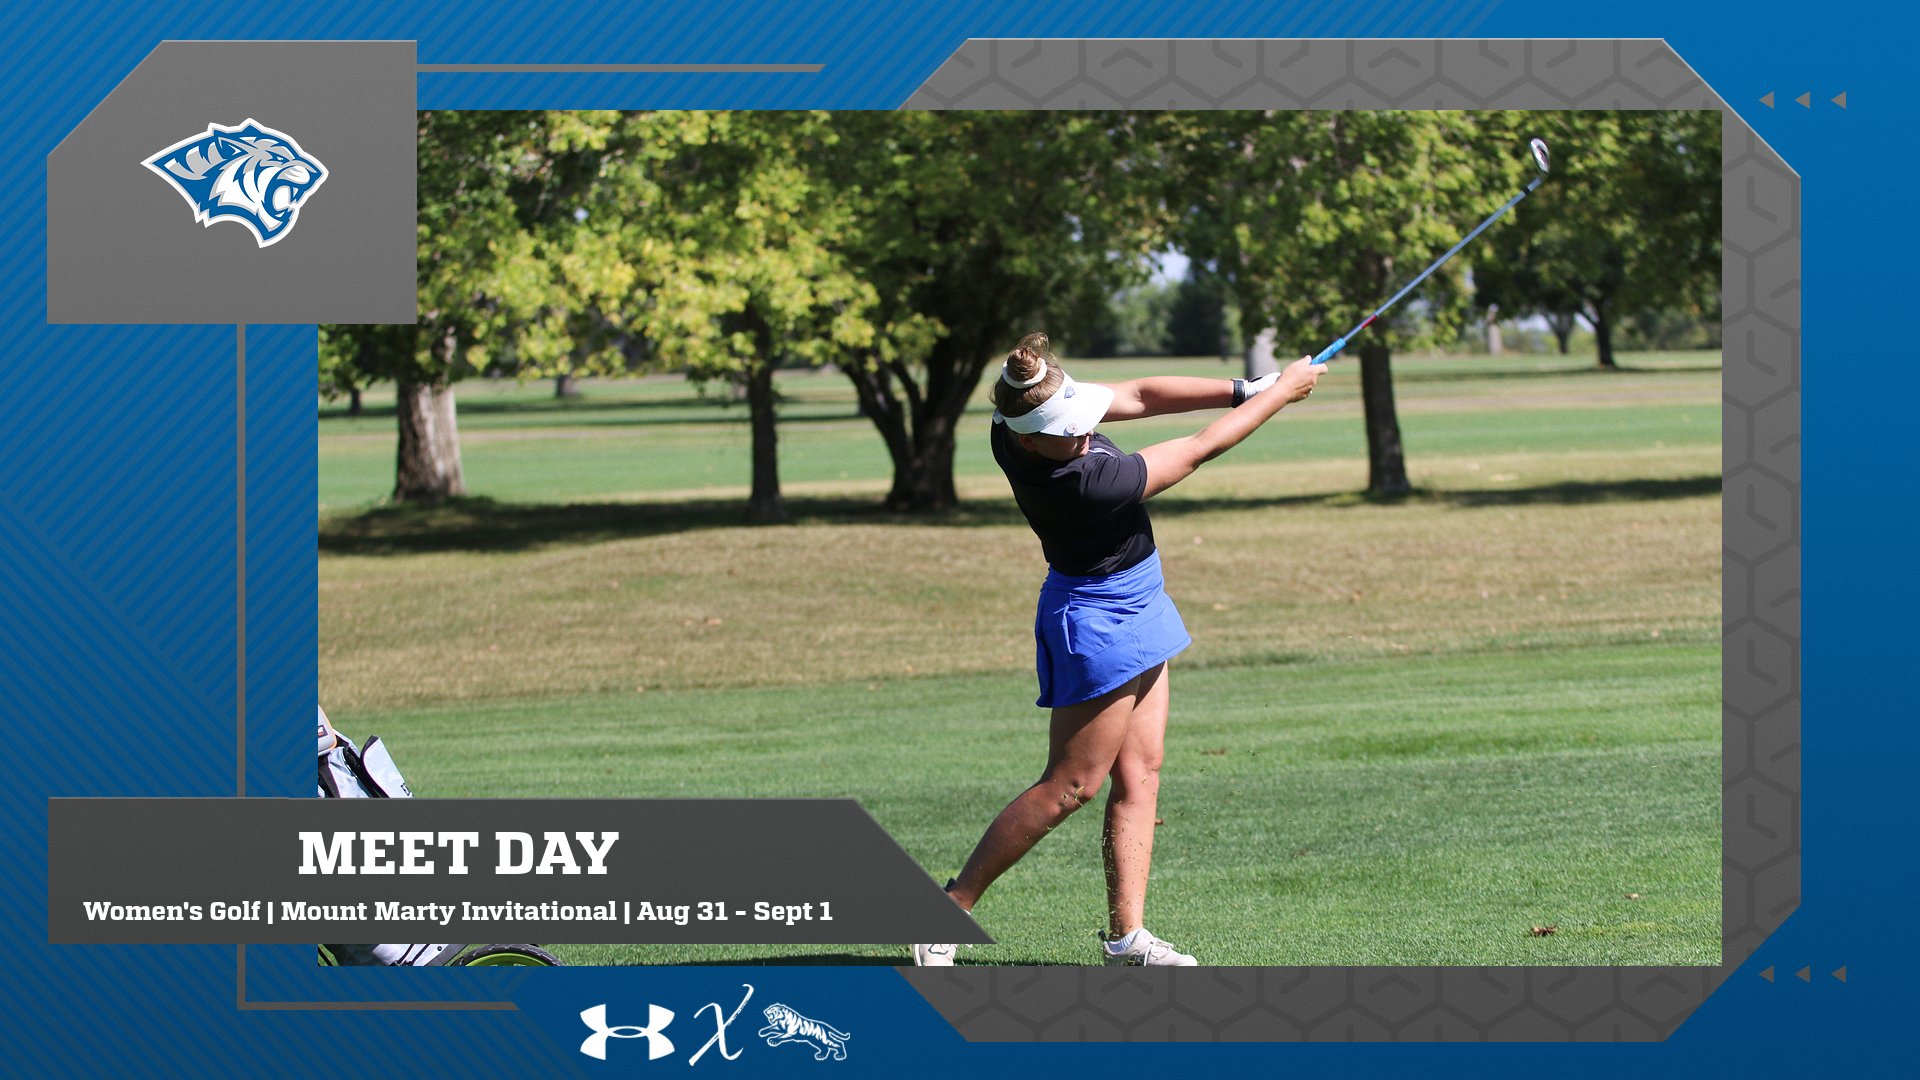 DWU WOMEN’S GOLF TEAM OPENS 2023 SEASON WITH DAY ONE AT MOUNT MARTY INVITATIONAL